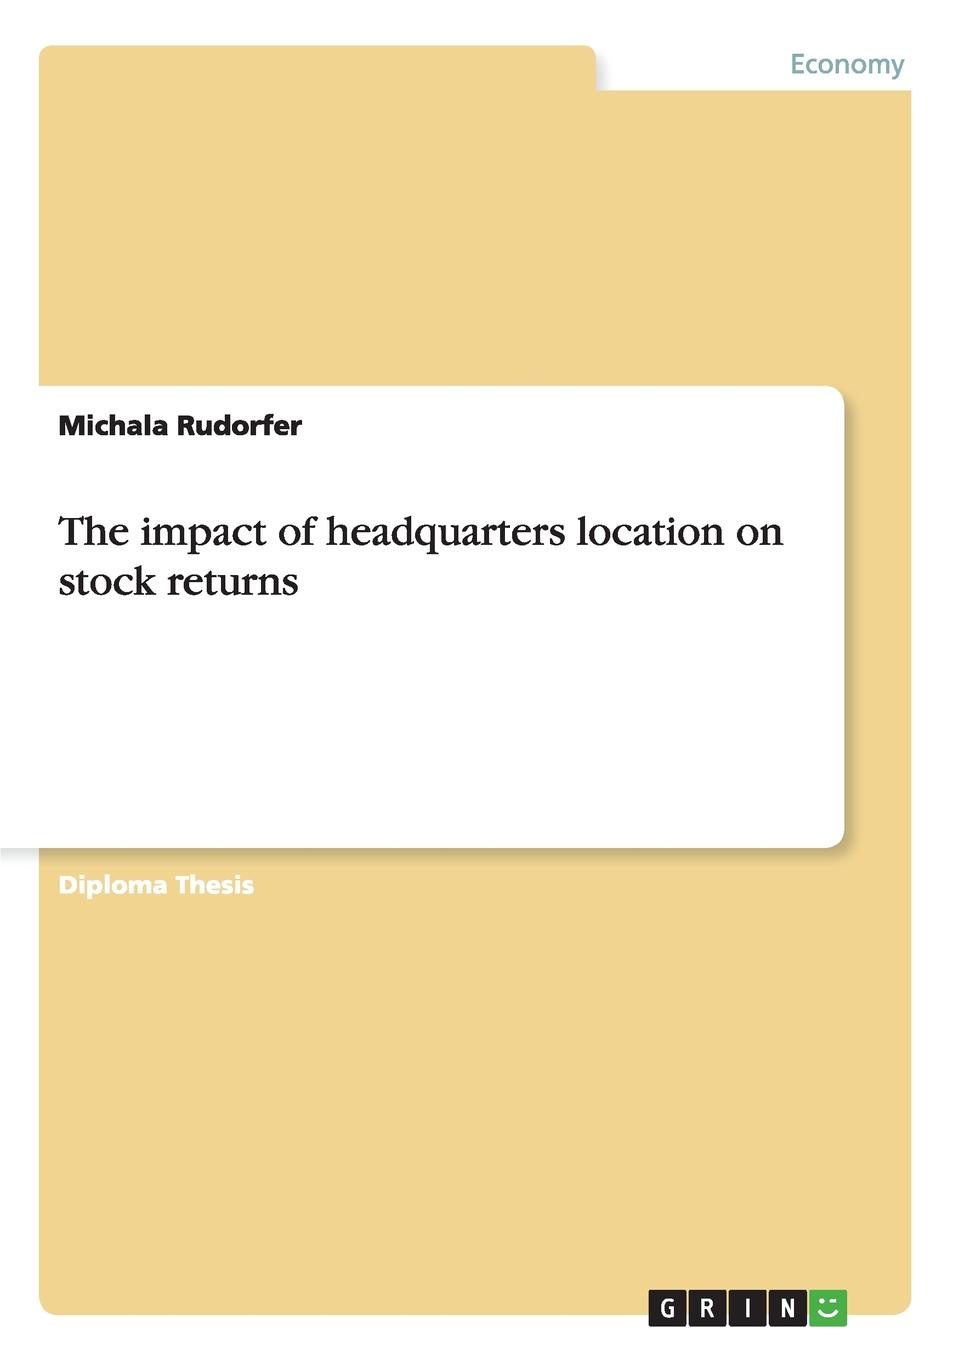 The impact of headquarters location on stock returns